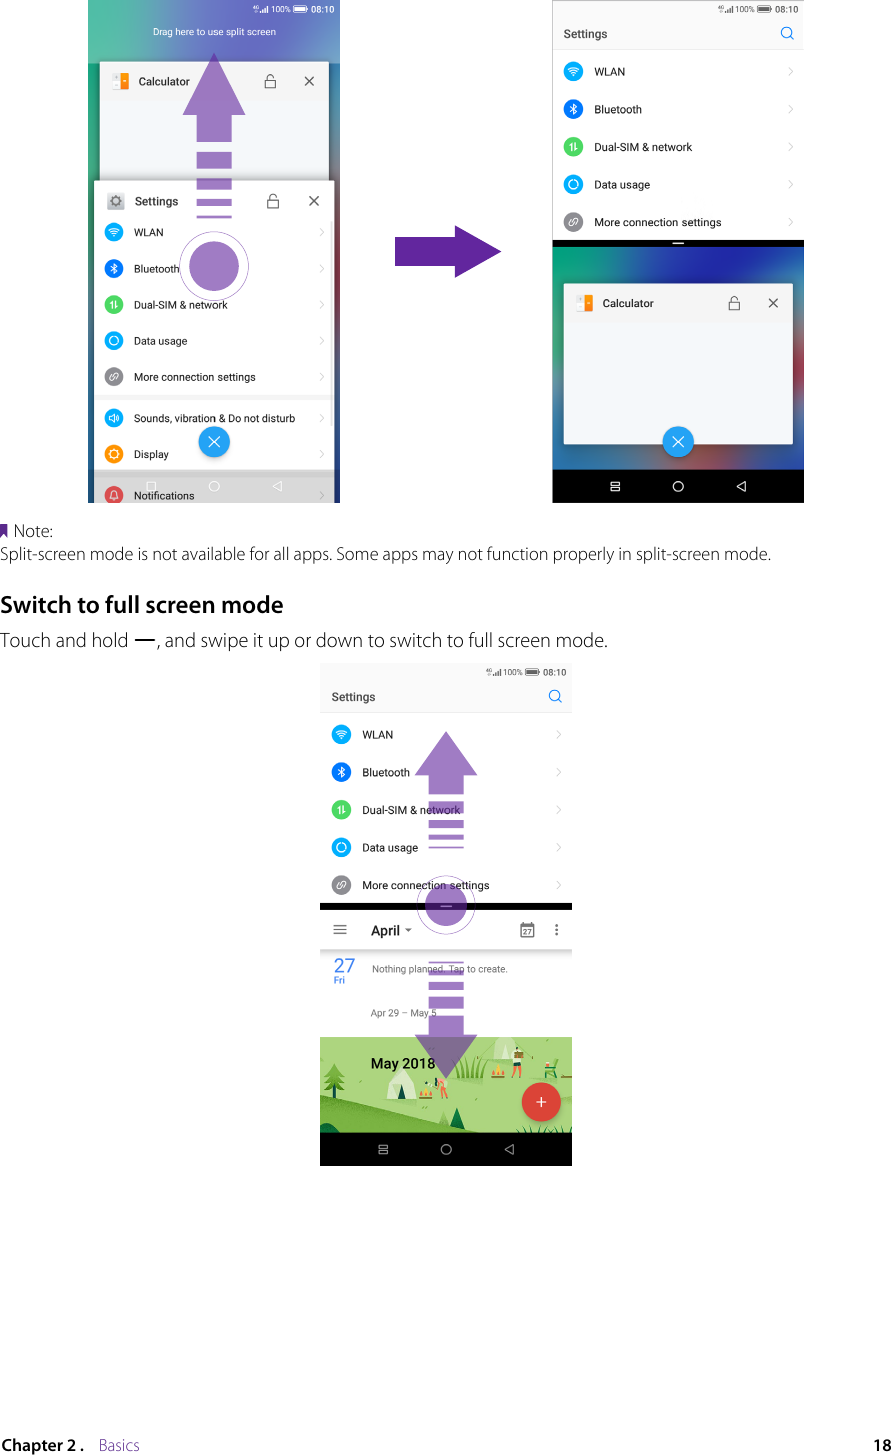 18Chapter 2 .    BasicsNote:Split-screen mode is not available for all apps. Some apps may not function properly in split-screen mode.Switch to full screen modeTouch and hold  , and swipe it up or down to switch to full screen mode.